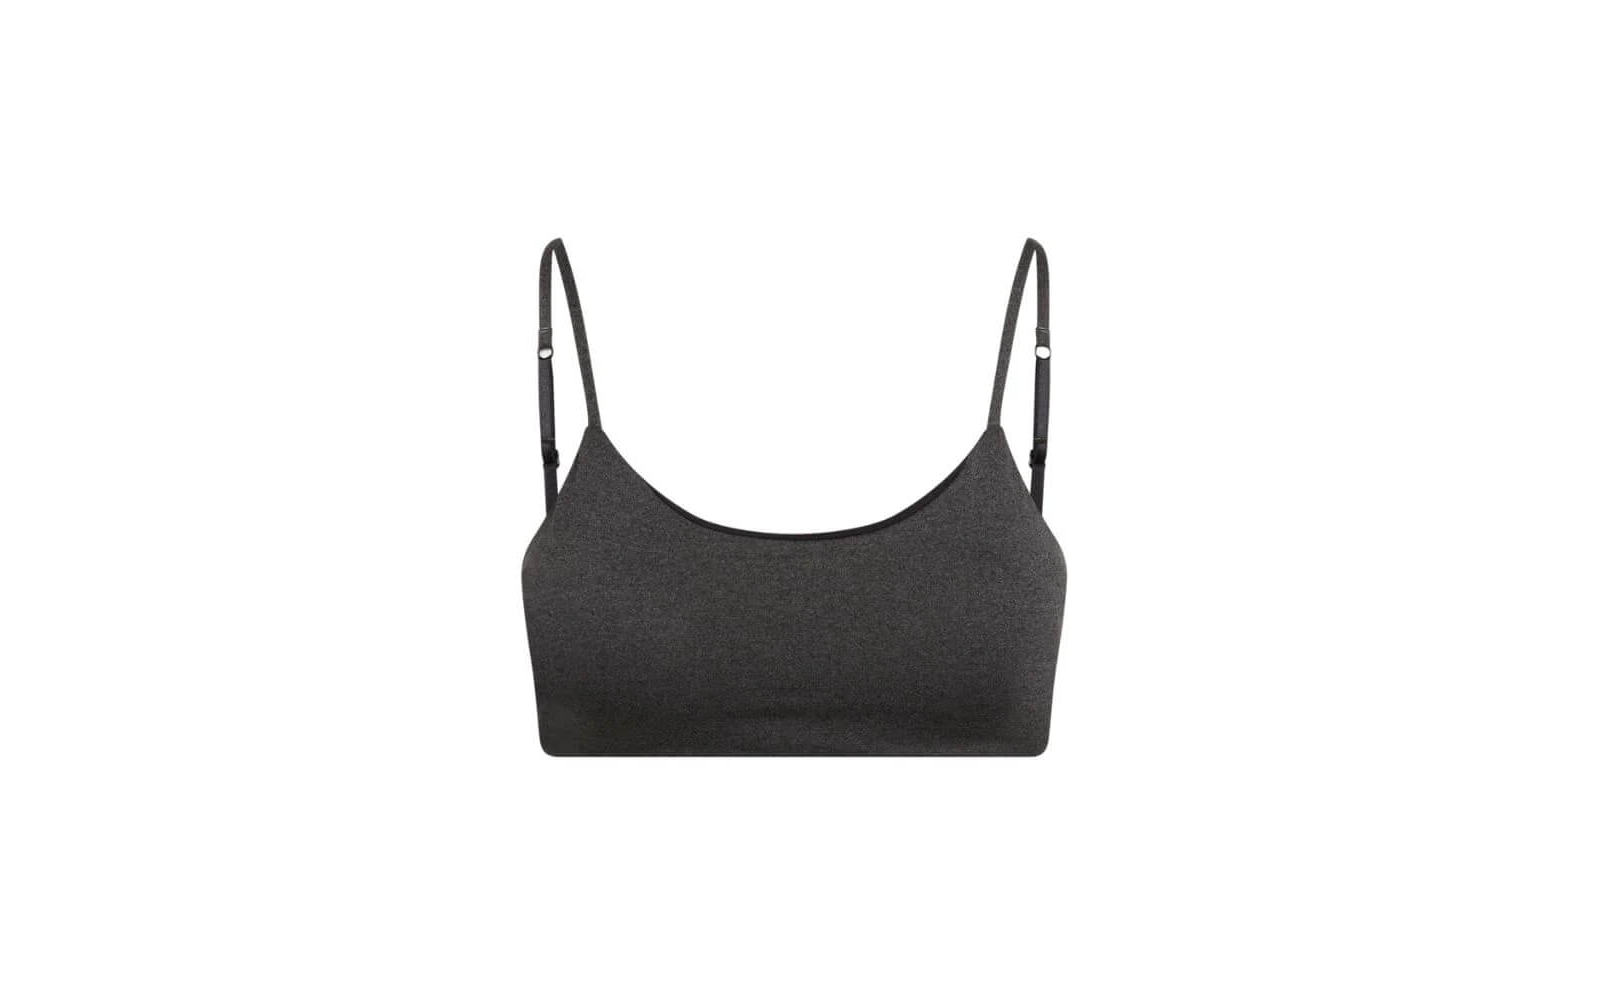 Padded bra by Bleuet for teens in charcoal.